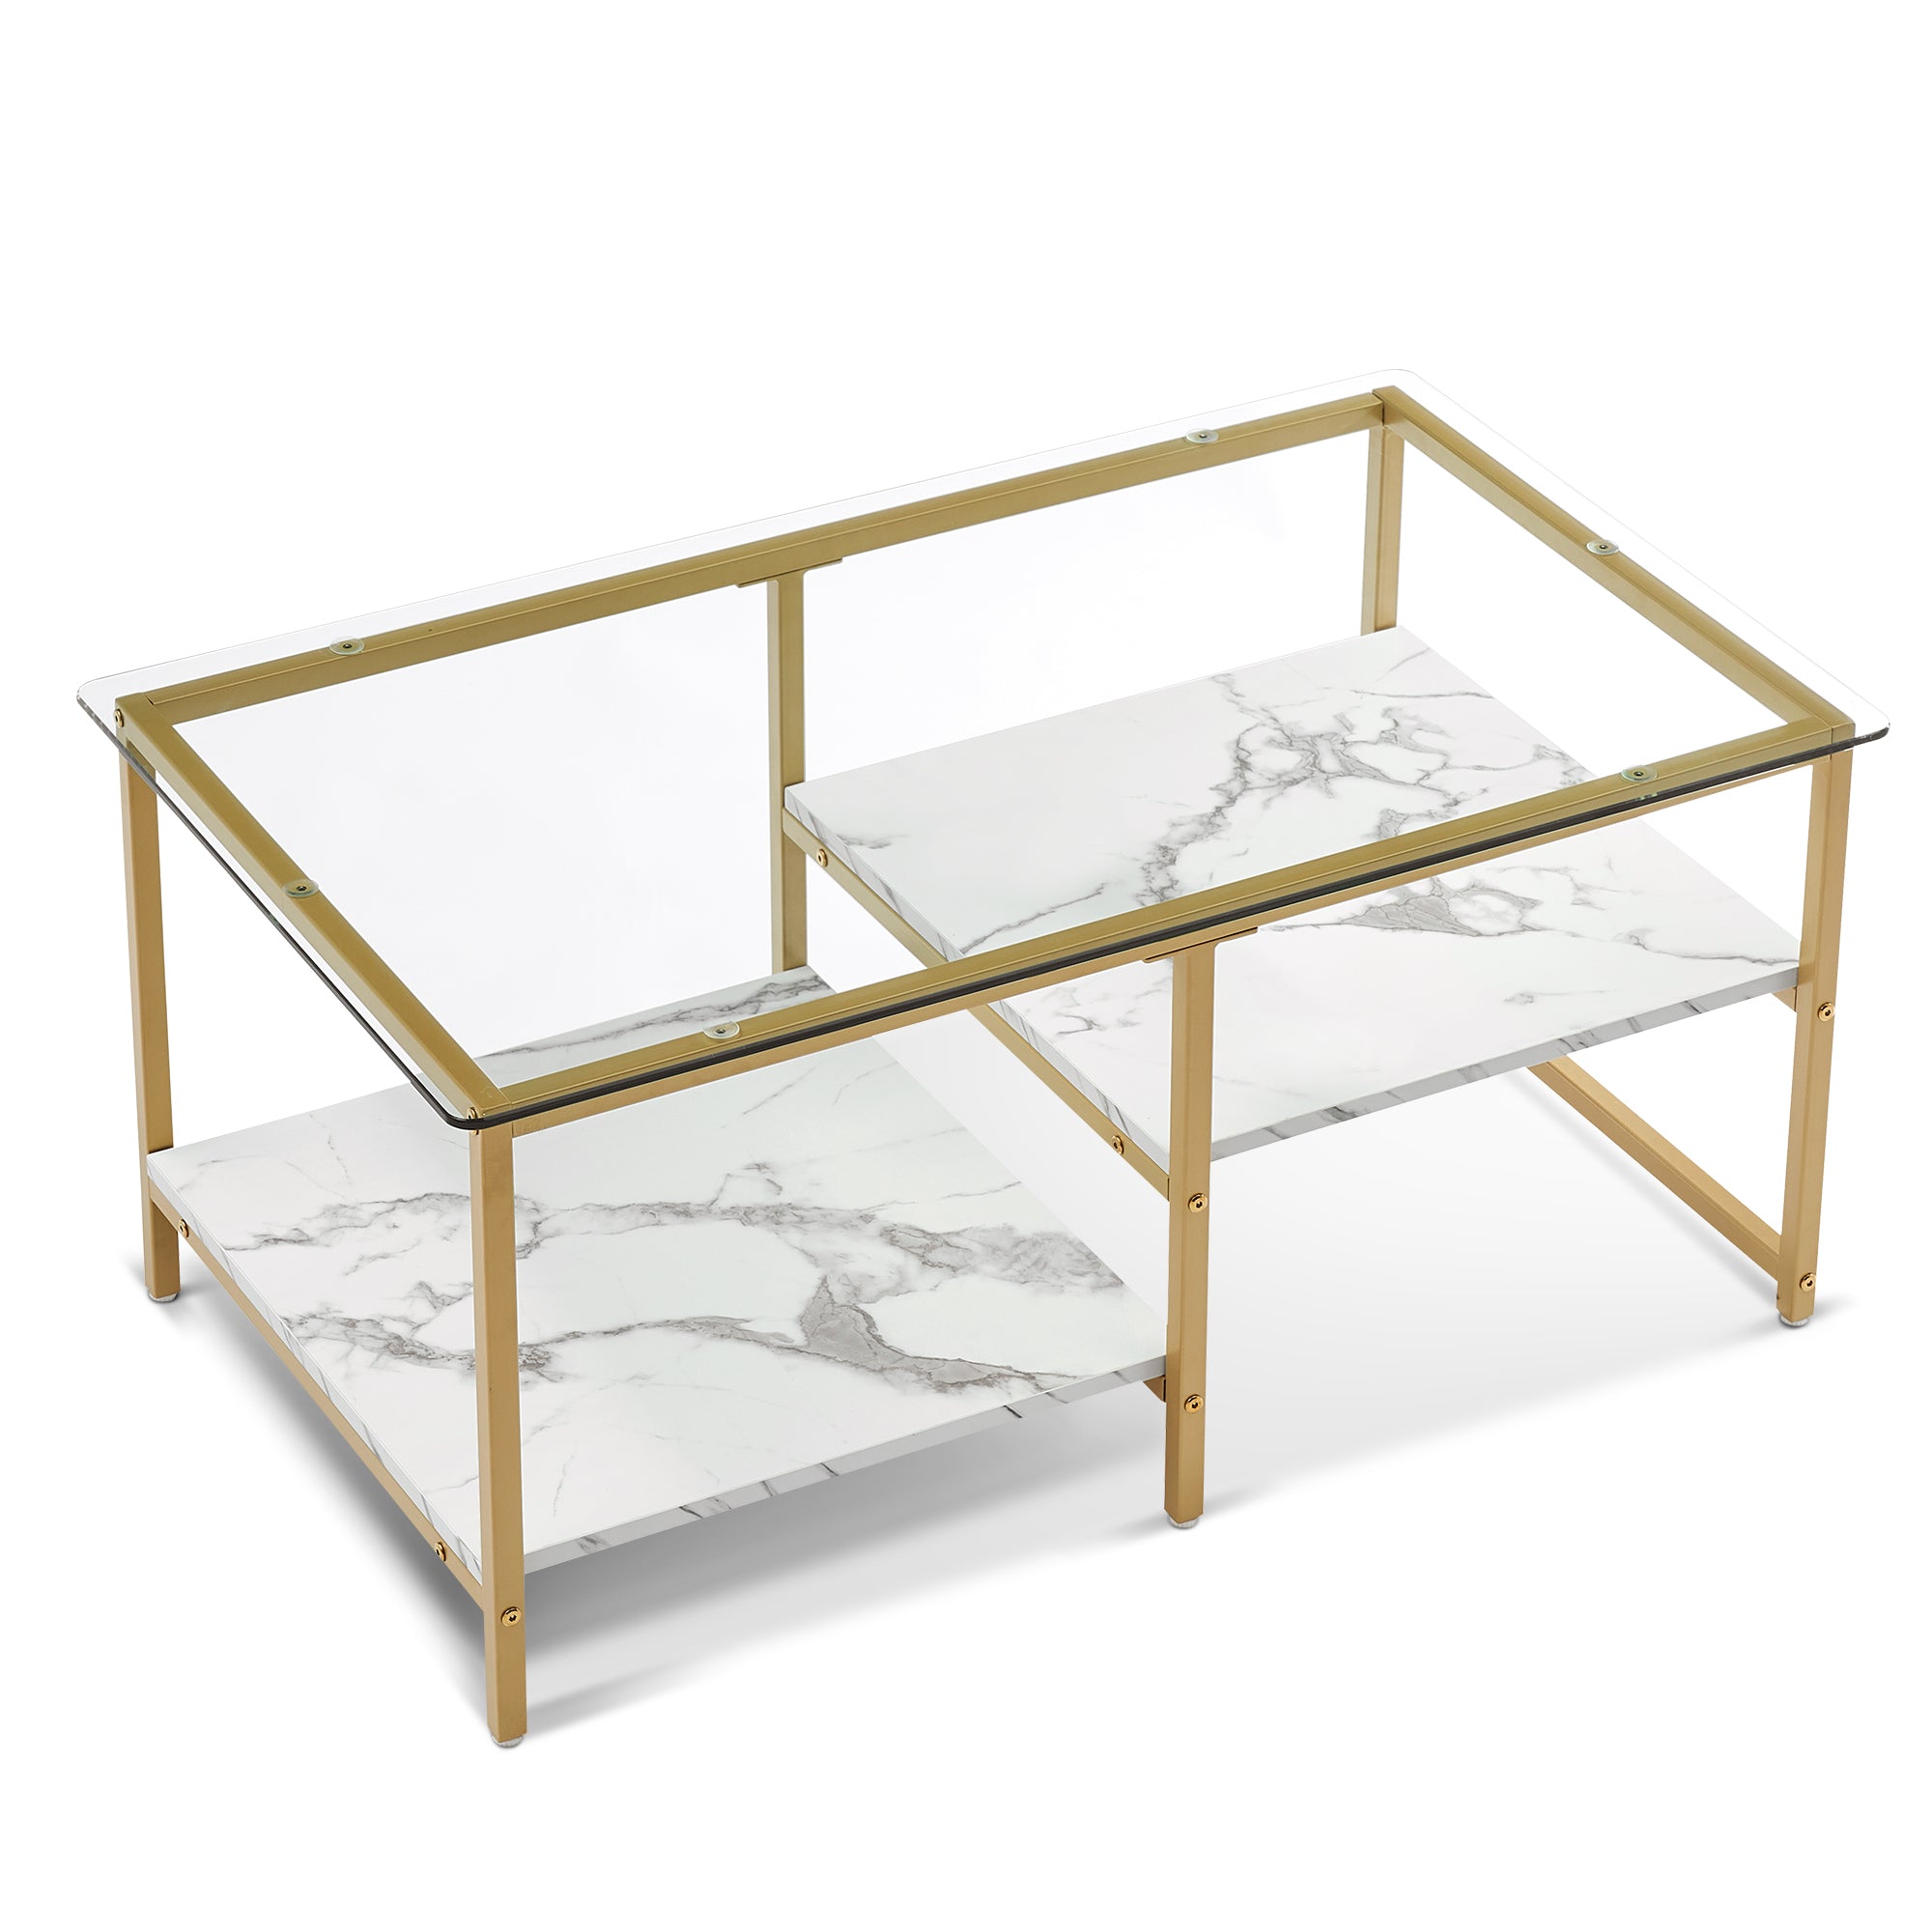 ivinta Rectangular Coffee Table, Tempered Glass Top Coffee Table with Gold Metal Frame, Modern Coffee Table for Living Room